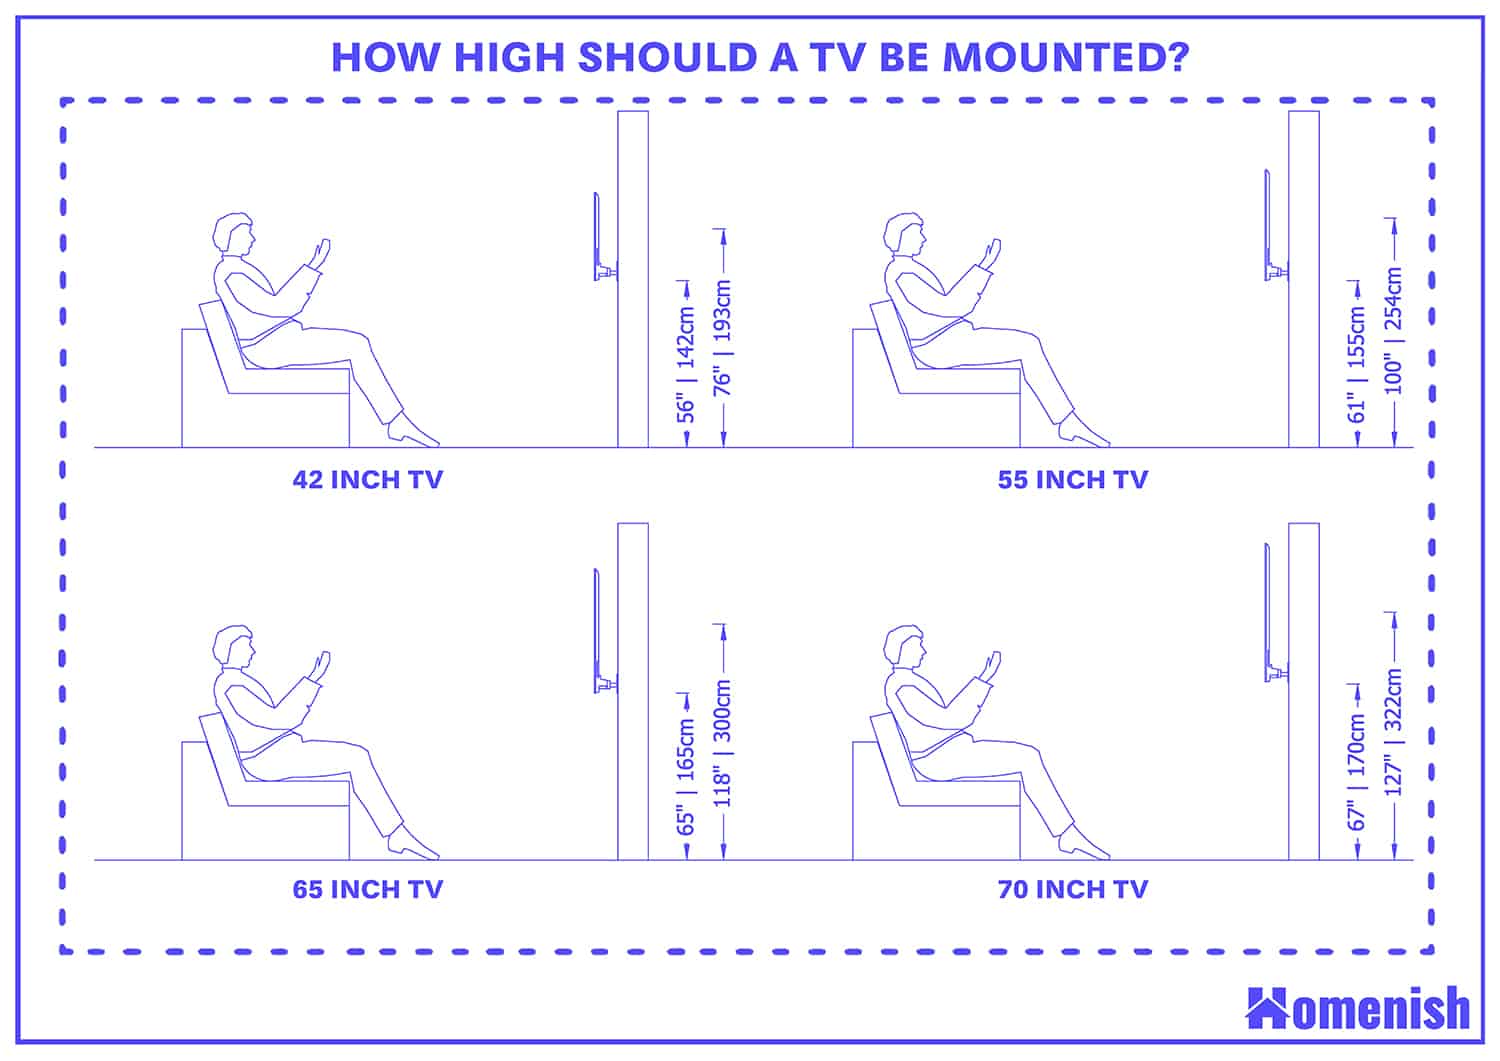 How high should a tv be mounted